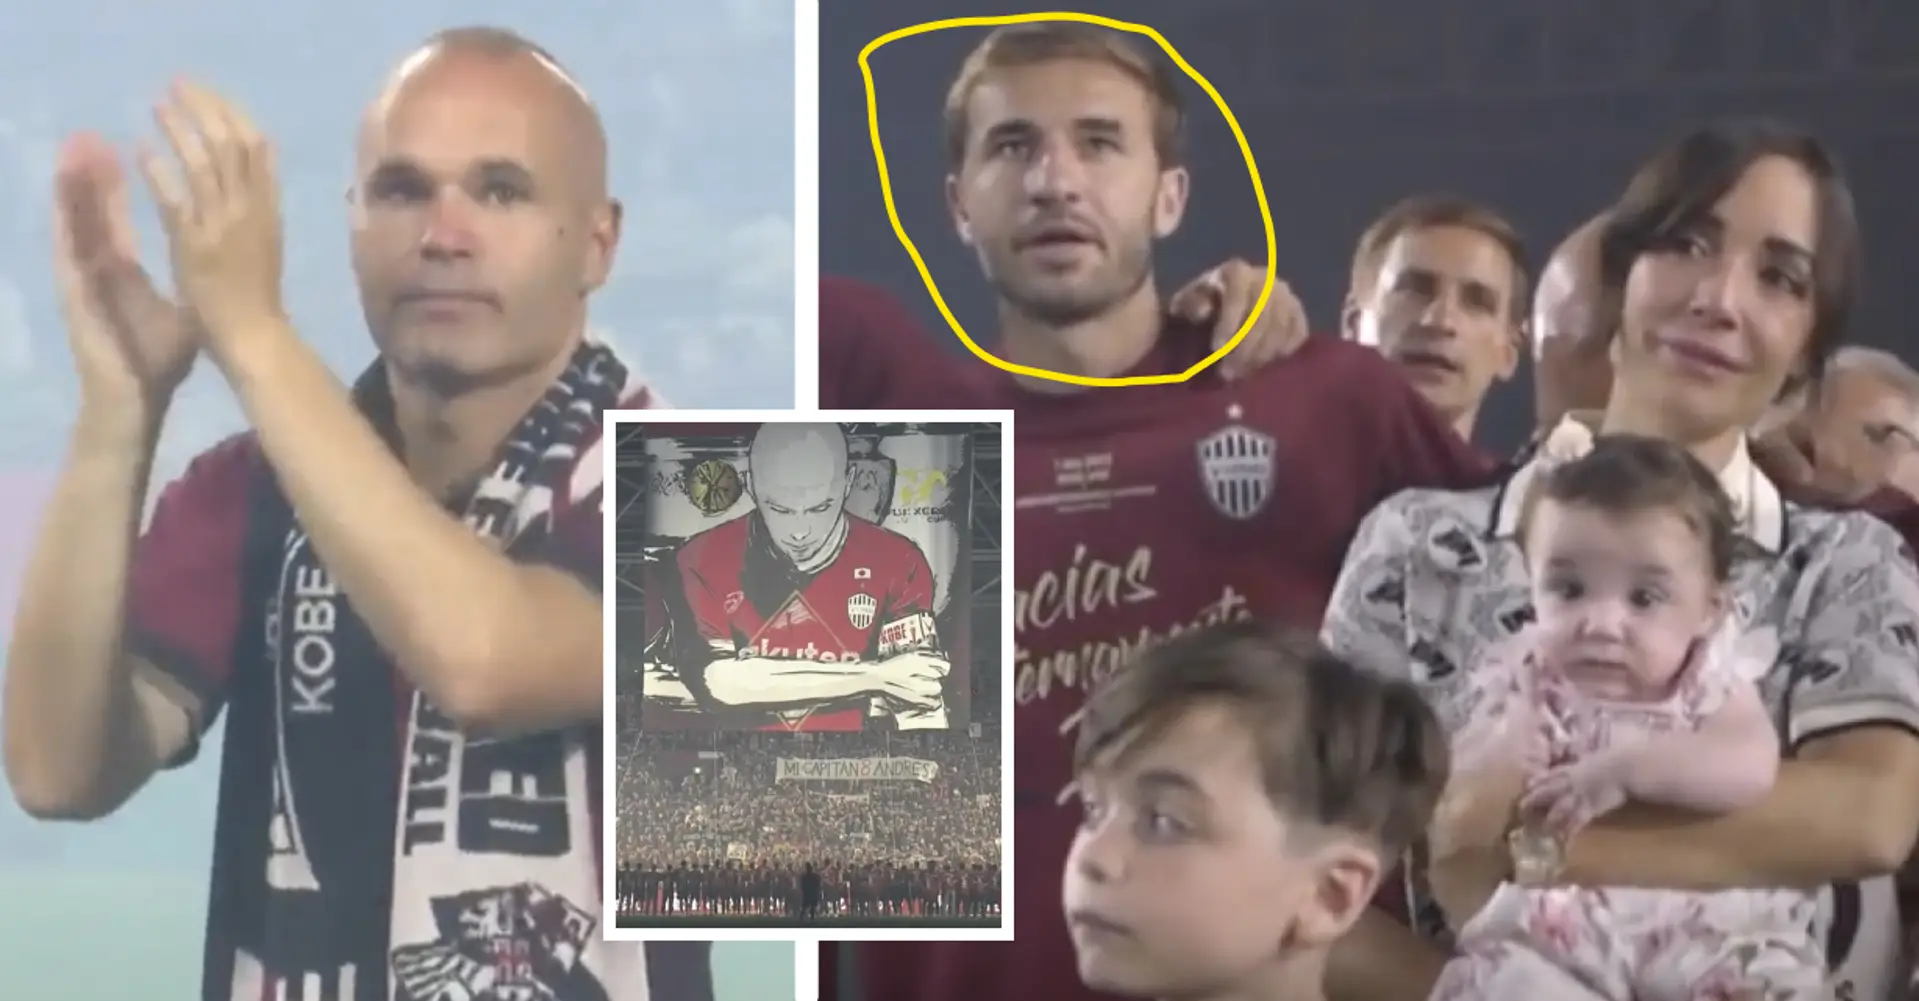 Vissel Kobe fans serenade Iniesta and his family after farewell match, one former Barca player spotted